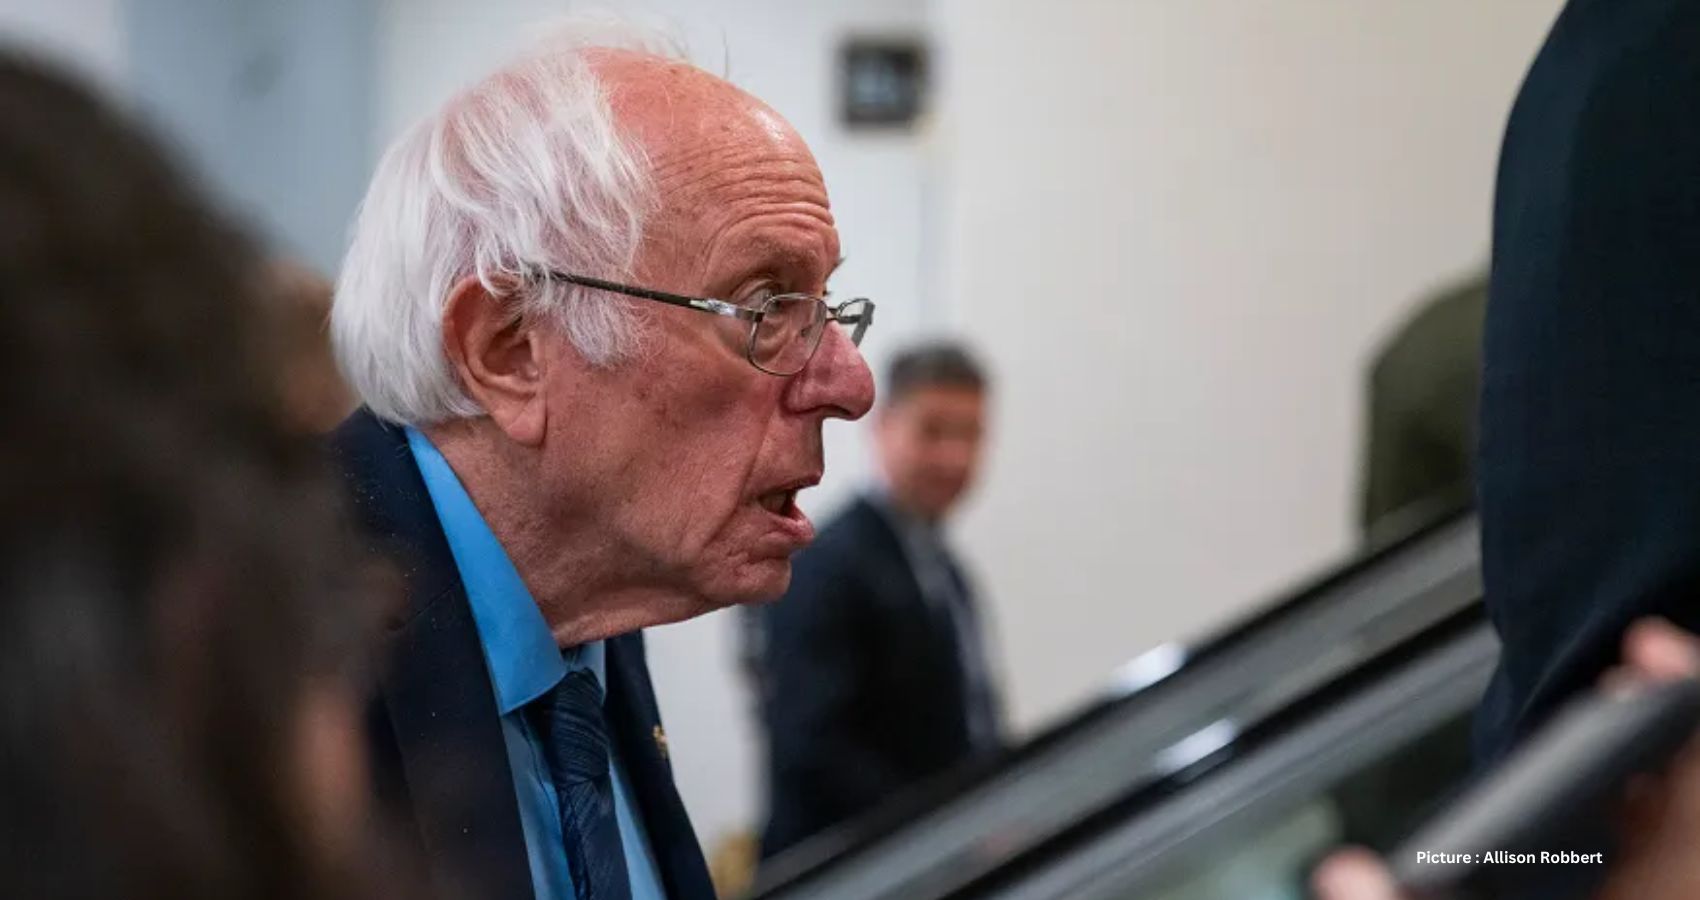 Featured & Cover  Sanders Proposes Four Day Workweek Bill with No Pay Reduction